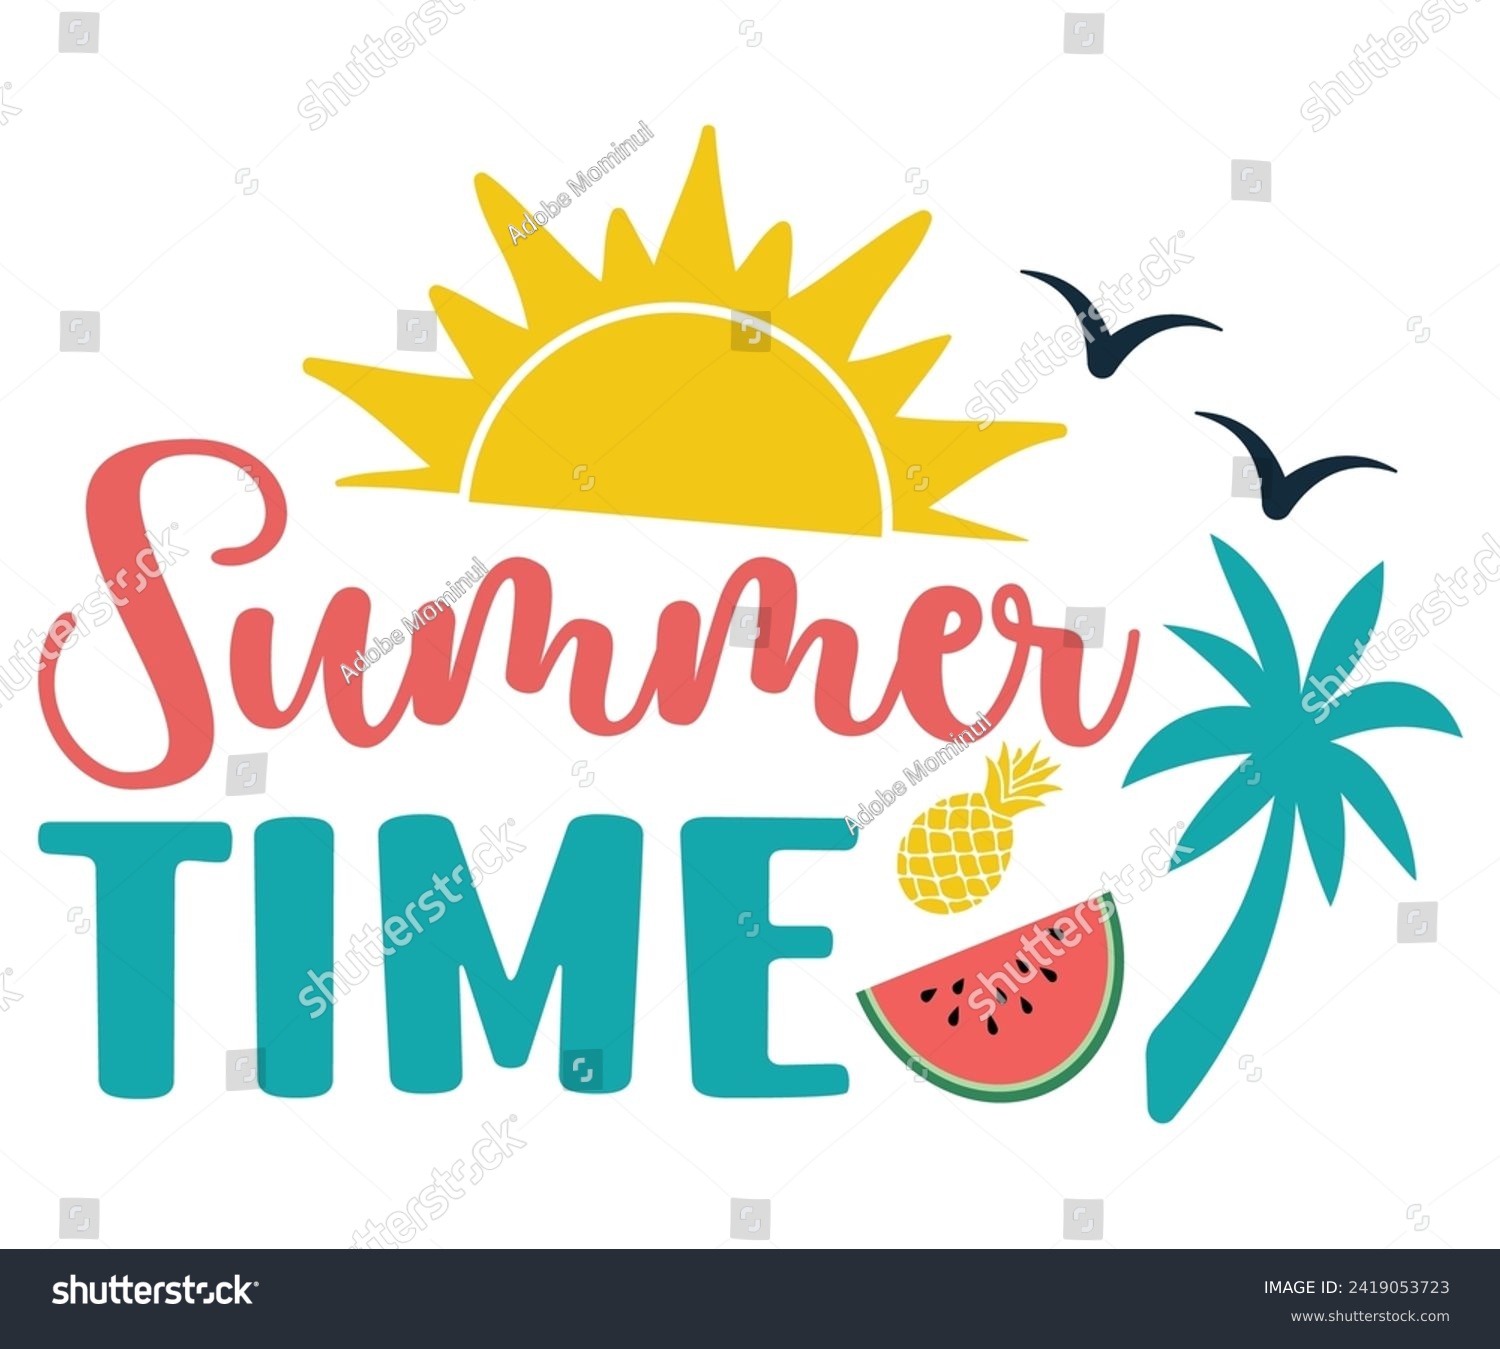 SVG of Summer Time Svg,Summer Day Svg,Retro Summer Svg,Beach Svg,Summer Quote,Beach Quotes,Funny Summer Svg,Watermelon Quotes Svg,Summer Beach,Summer Vacation Svg,Beach shirt svg,Cut Files,Silhouette svg